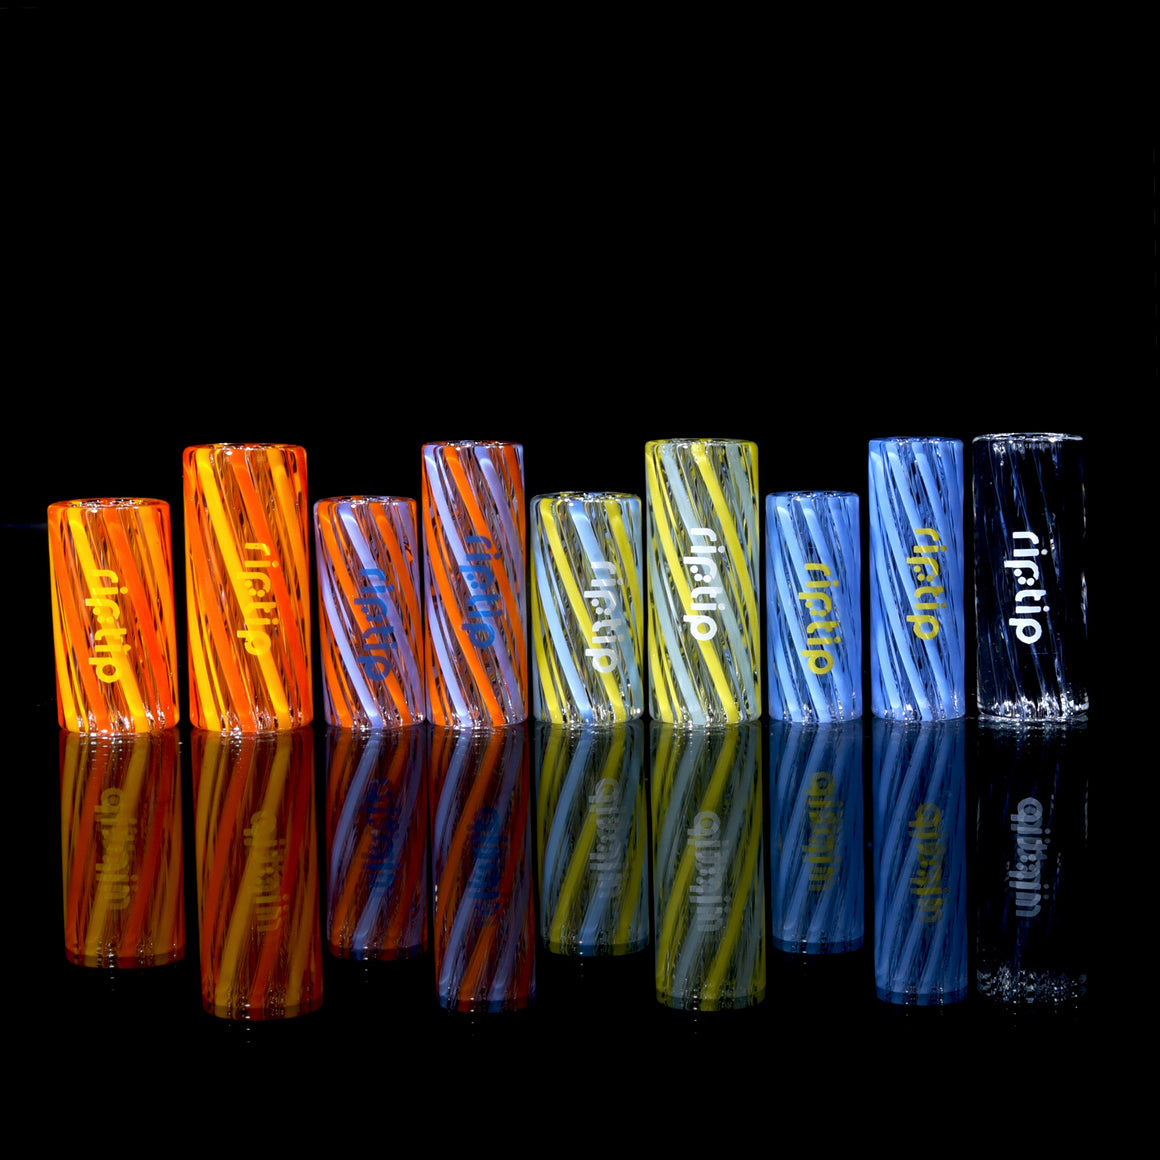 11mm Extra Long RipTip Filter Tips for Blunts, Joints, etc. - Calypso